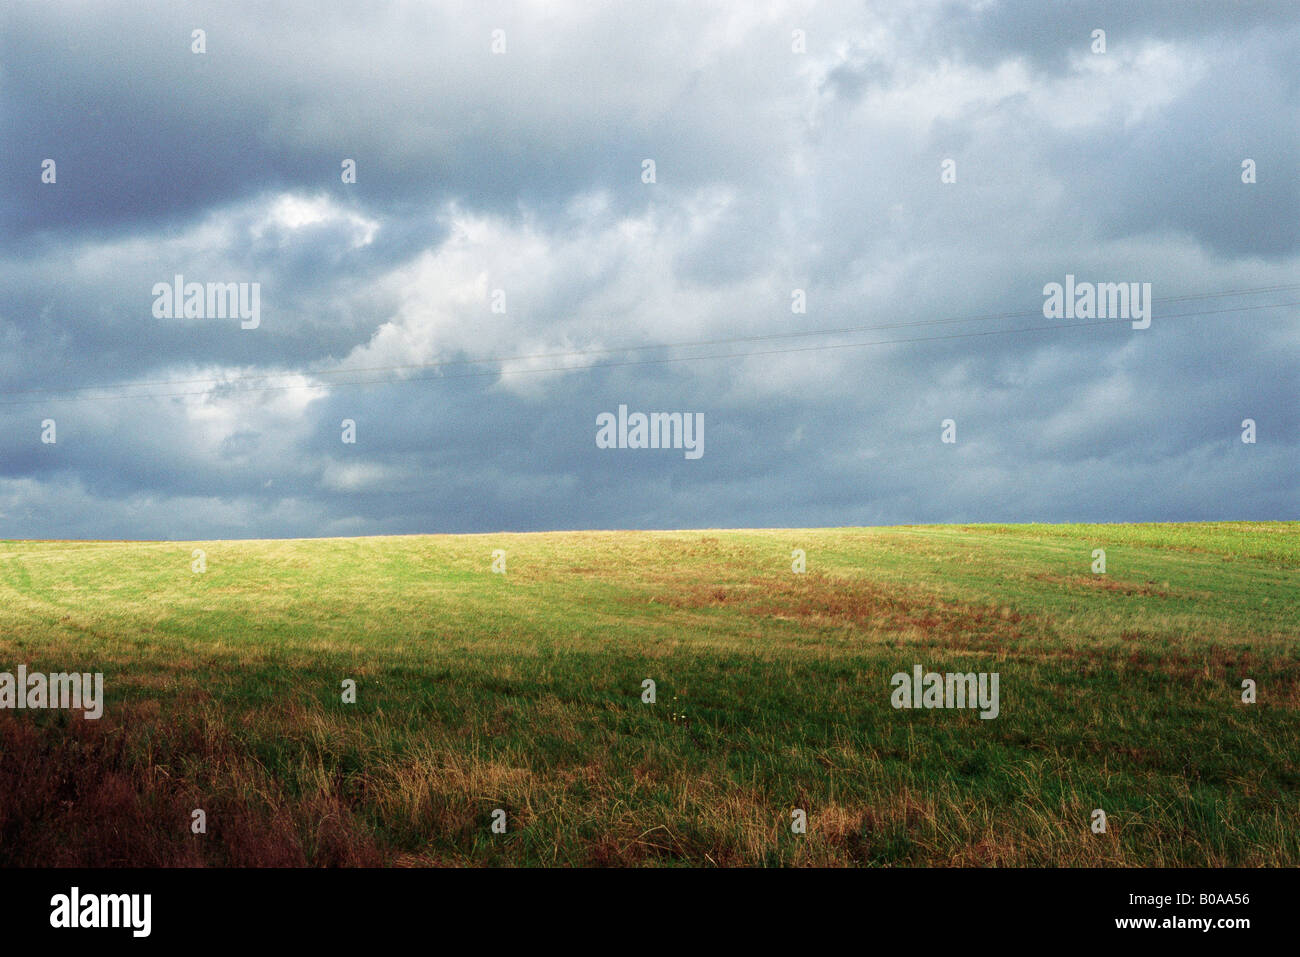 Grassy landscape with storm clouds, power lines in distance Stock Photo